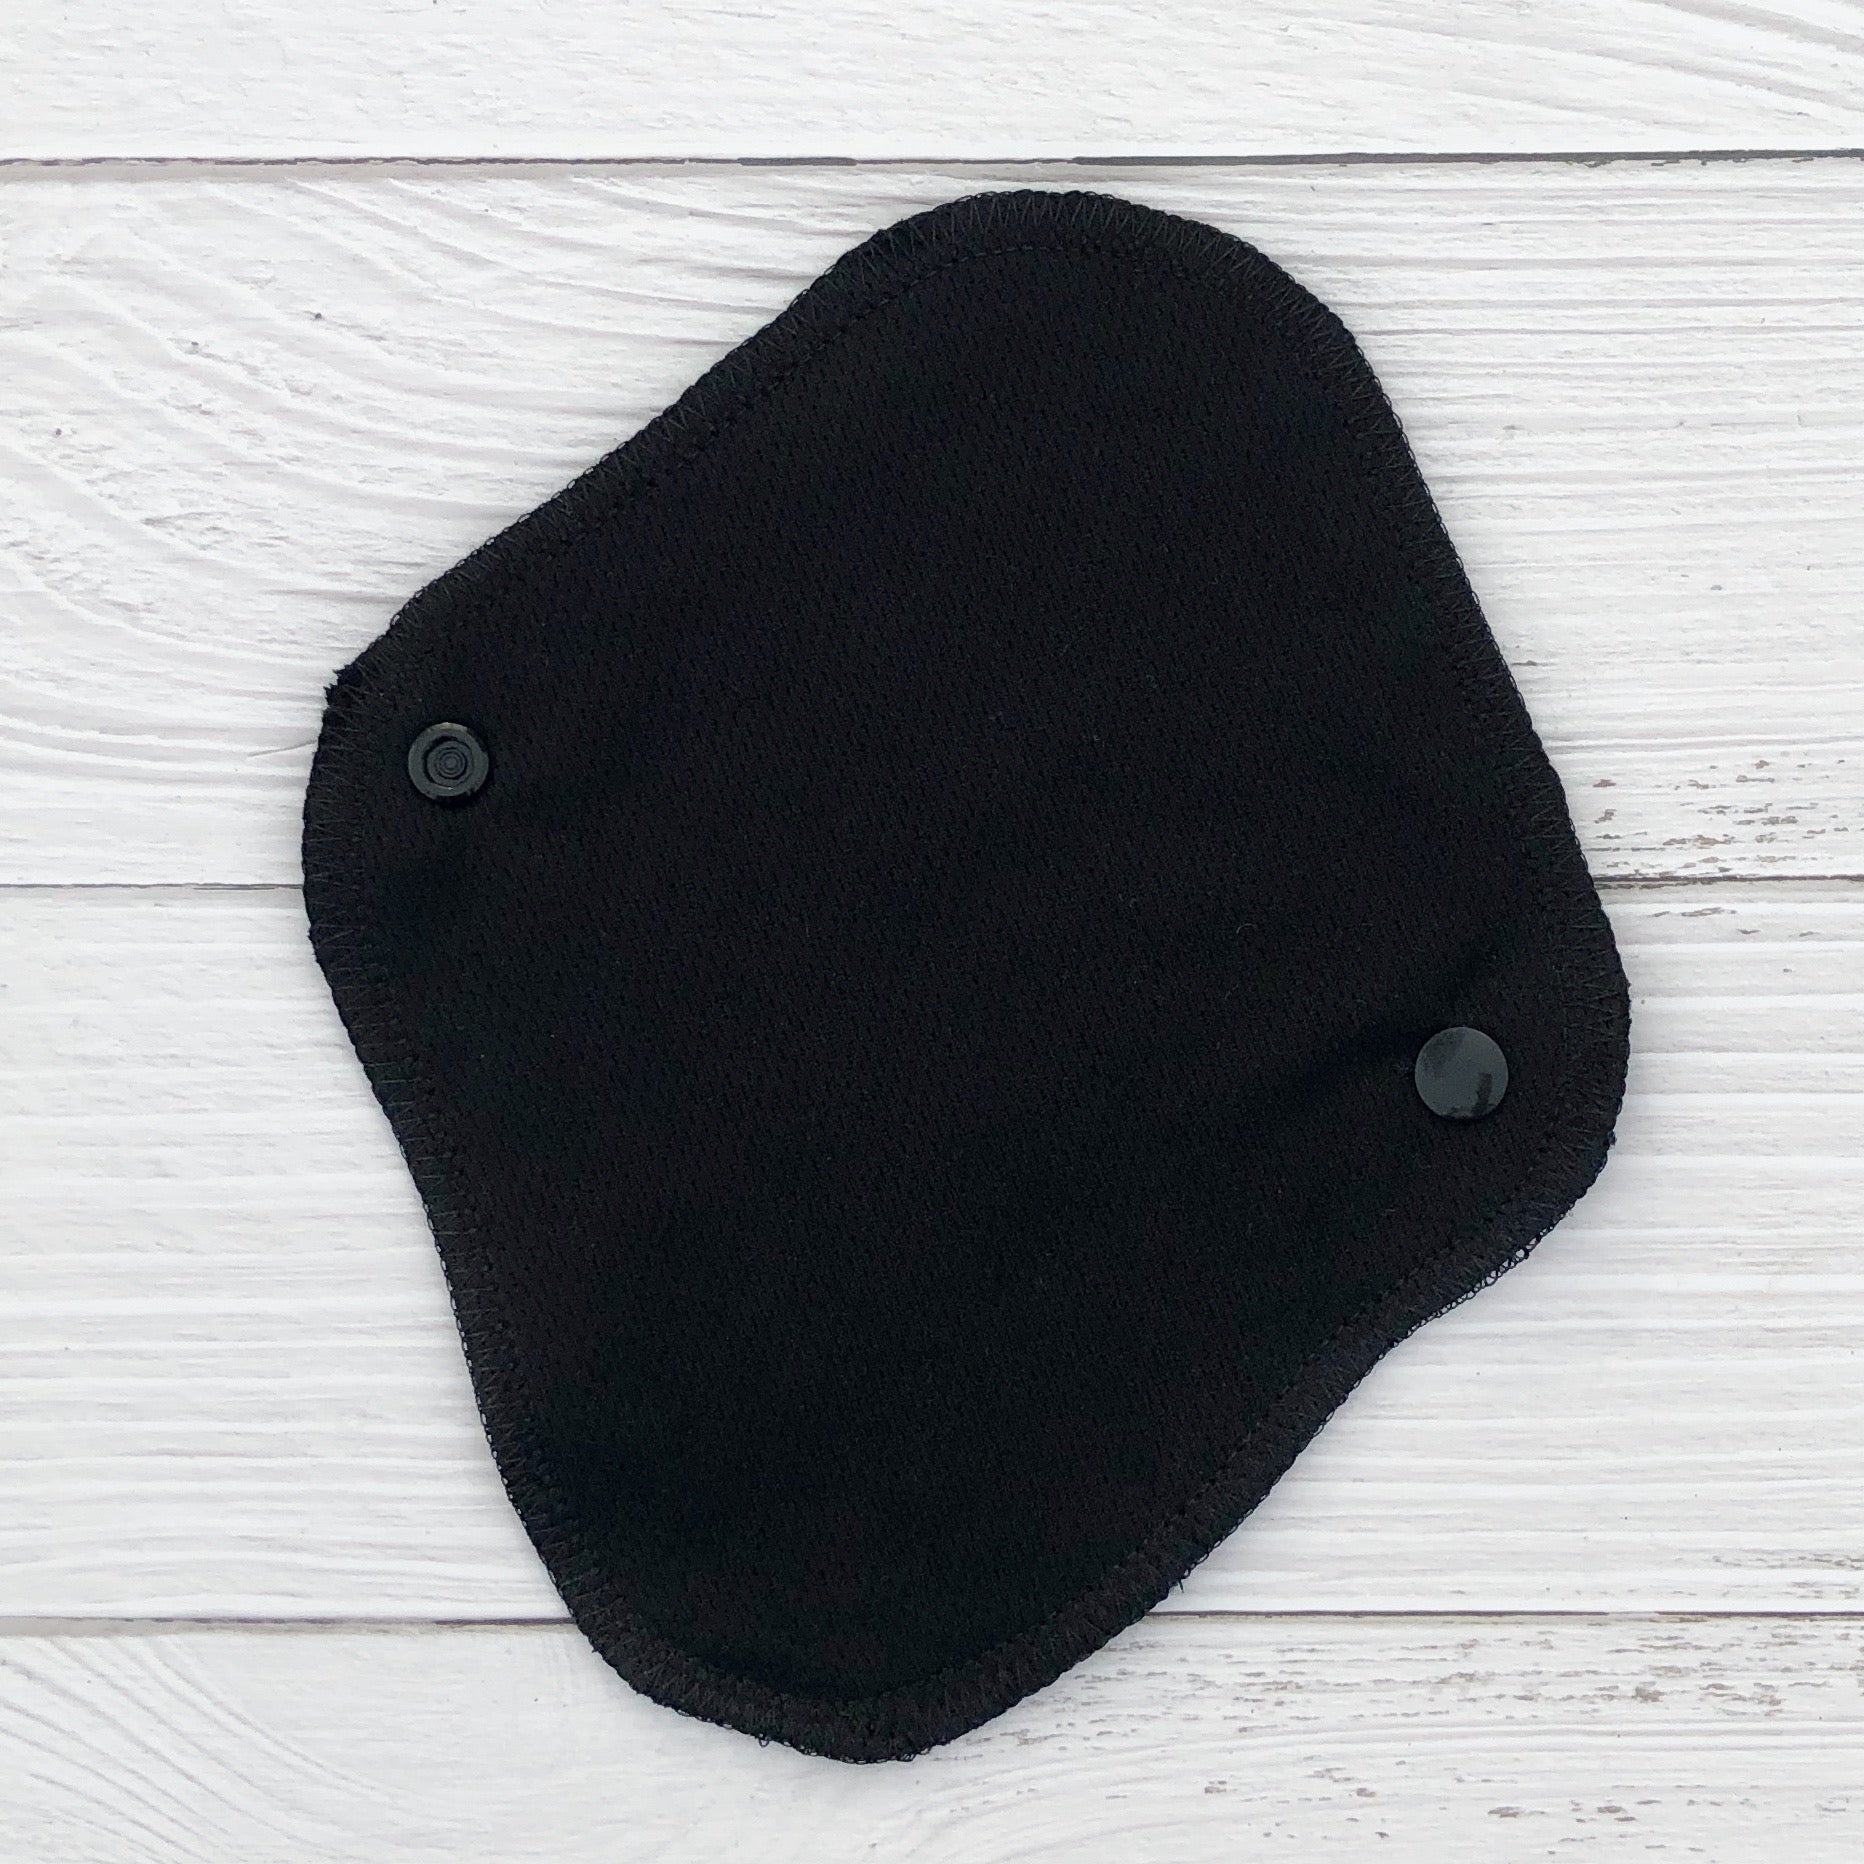 reusable pantyliner in black athletic wicking jersey